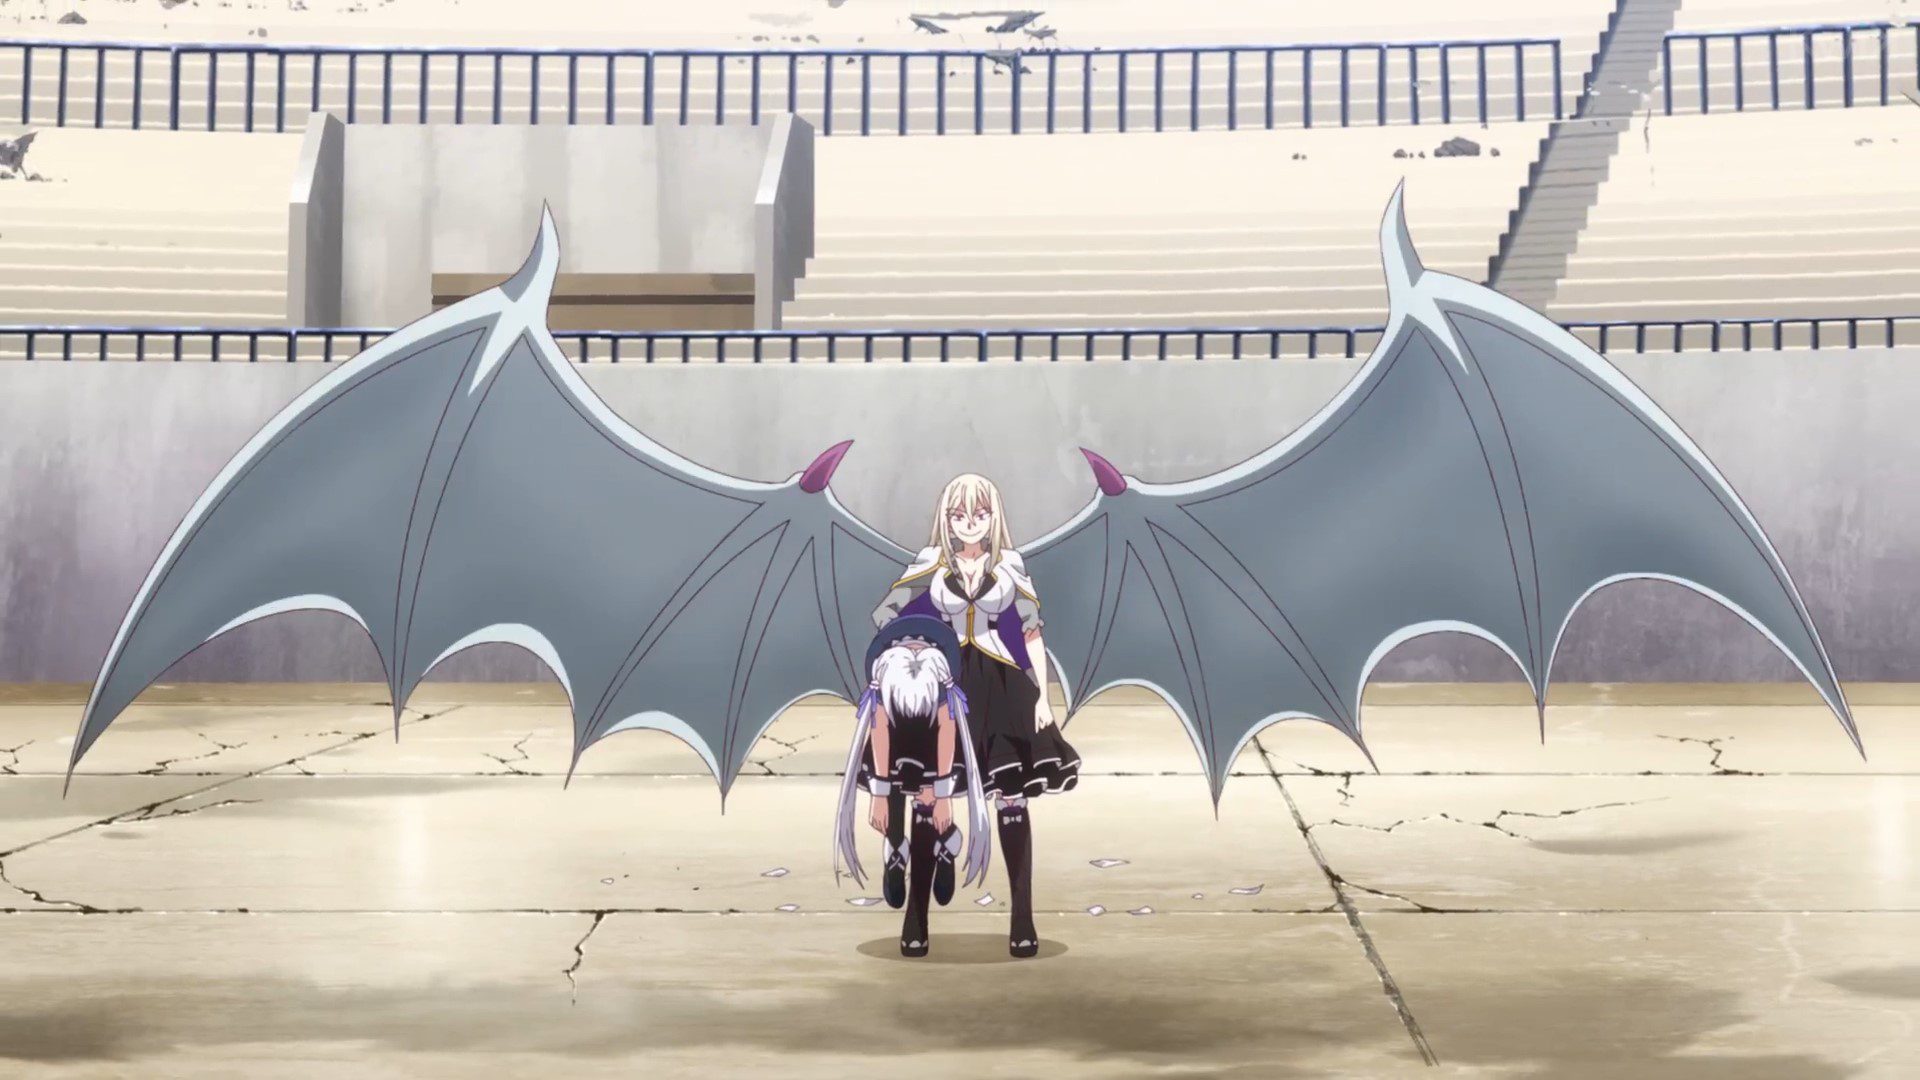 Demon lord born as a typical nobody episode 5 release date and where to watch